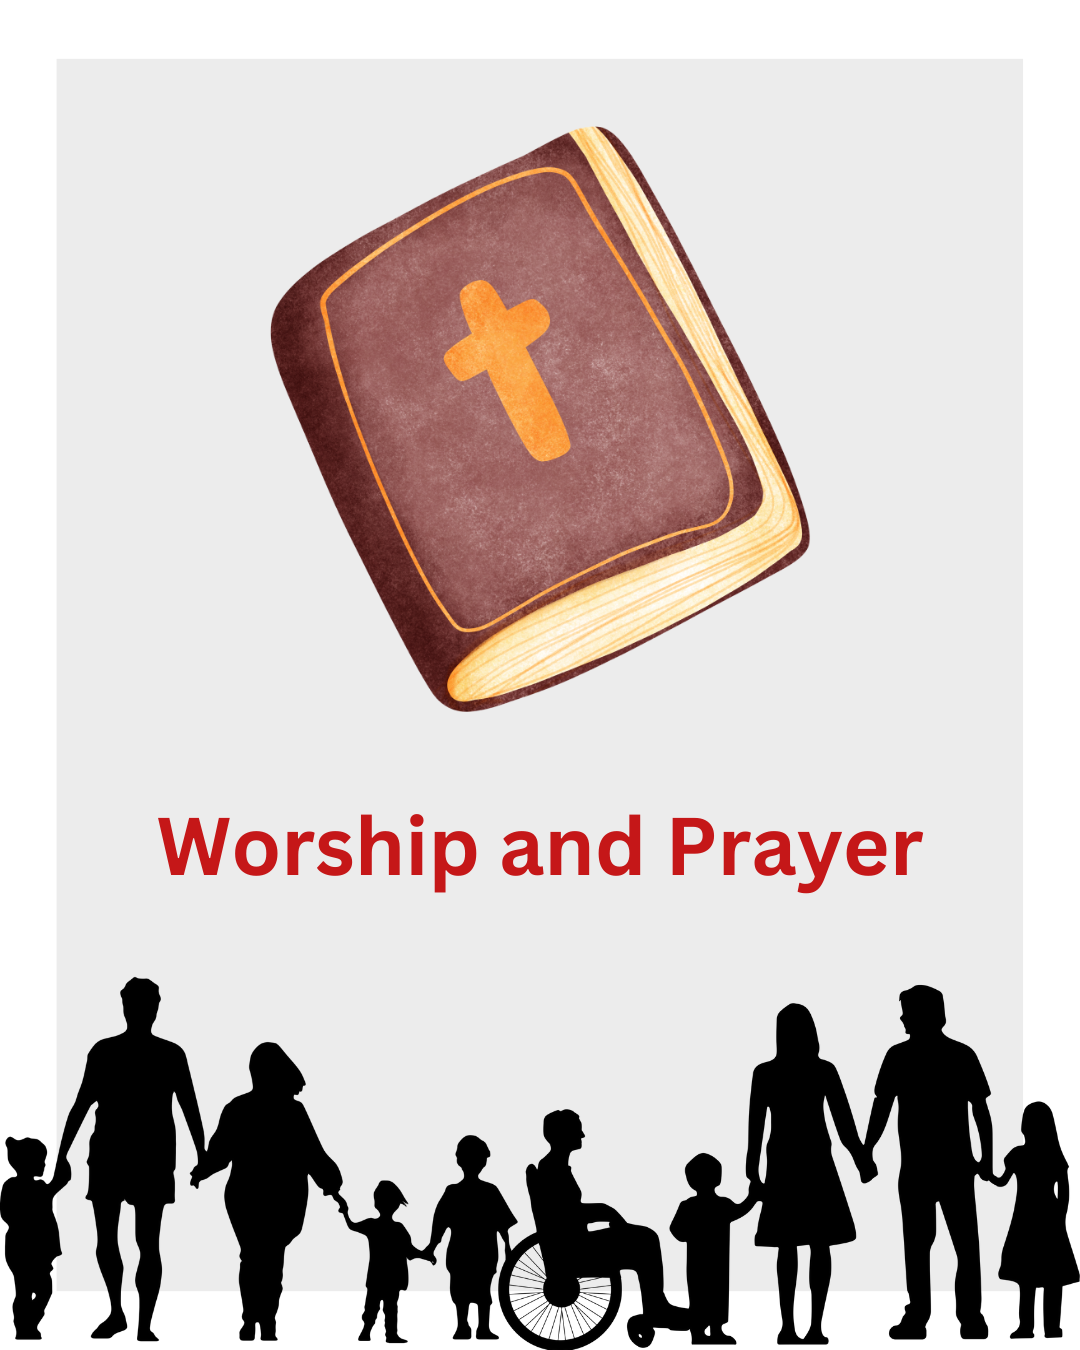 Worship and Prayer. Picture shows a bible and a silhouette of a diverse group of people holding hands